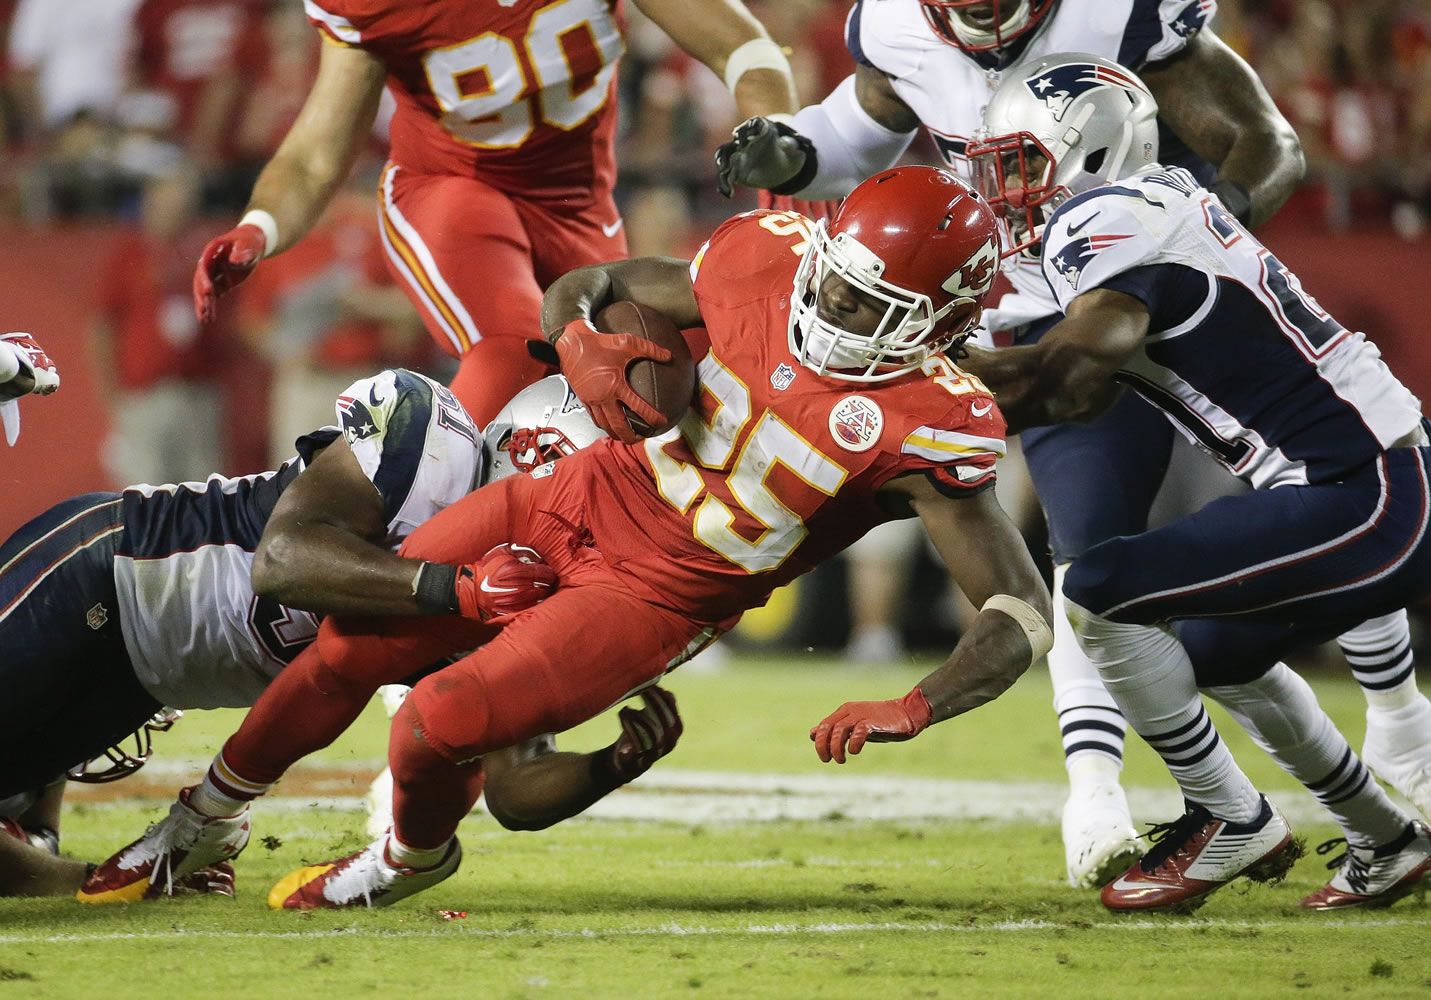 Kansas City Chiefs running back Jamaal Charles, center, runs with the ball as New England Patriots linebacker Jerod Mayo, left, and defensive back Malcolm Butler, right, defend during the third quarter Monday, Sept. 29, 2014, in Kansas City, Mo.